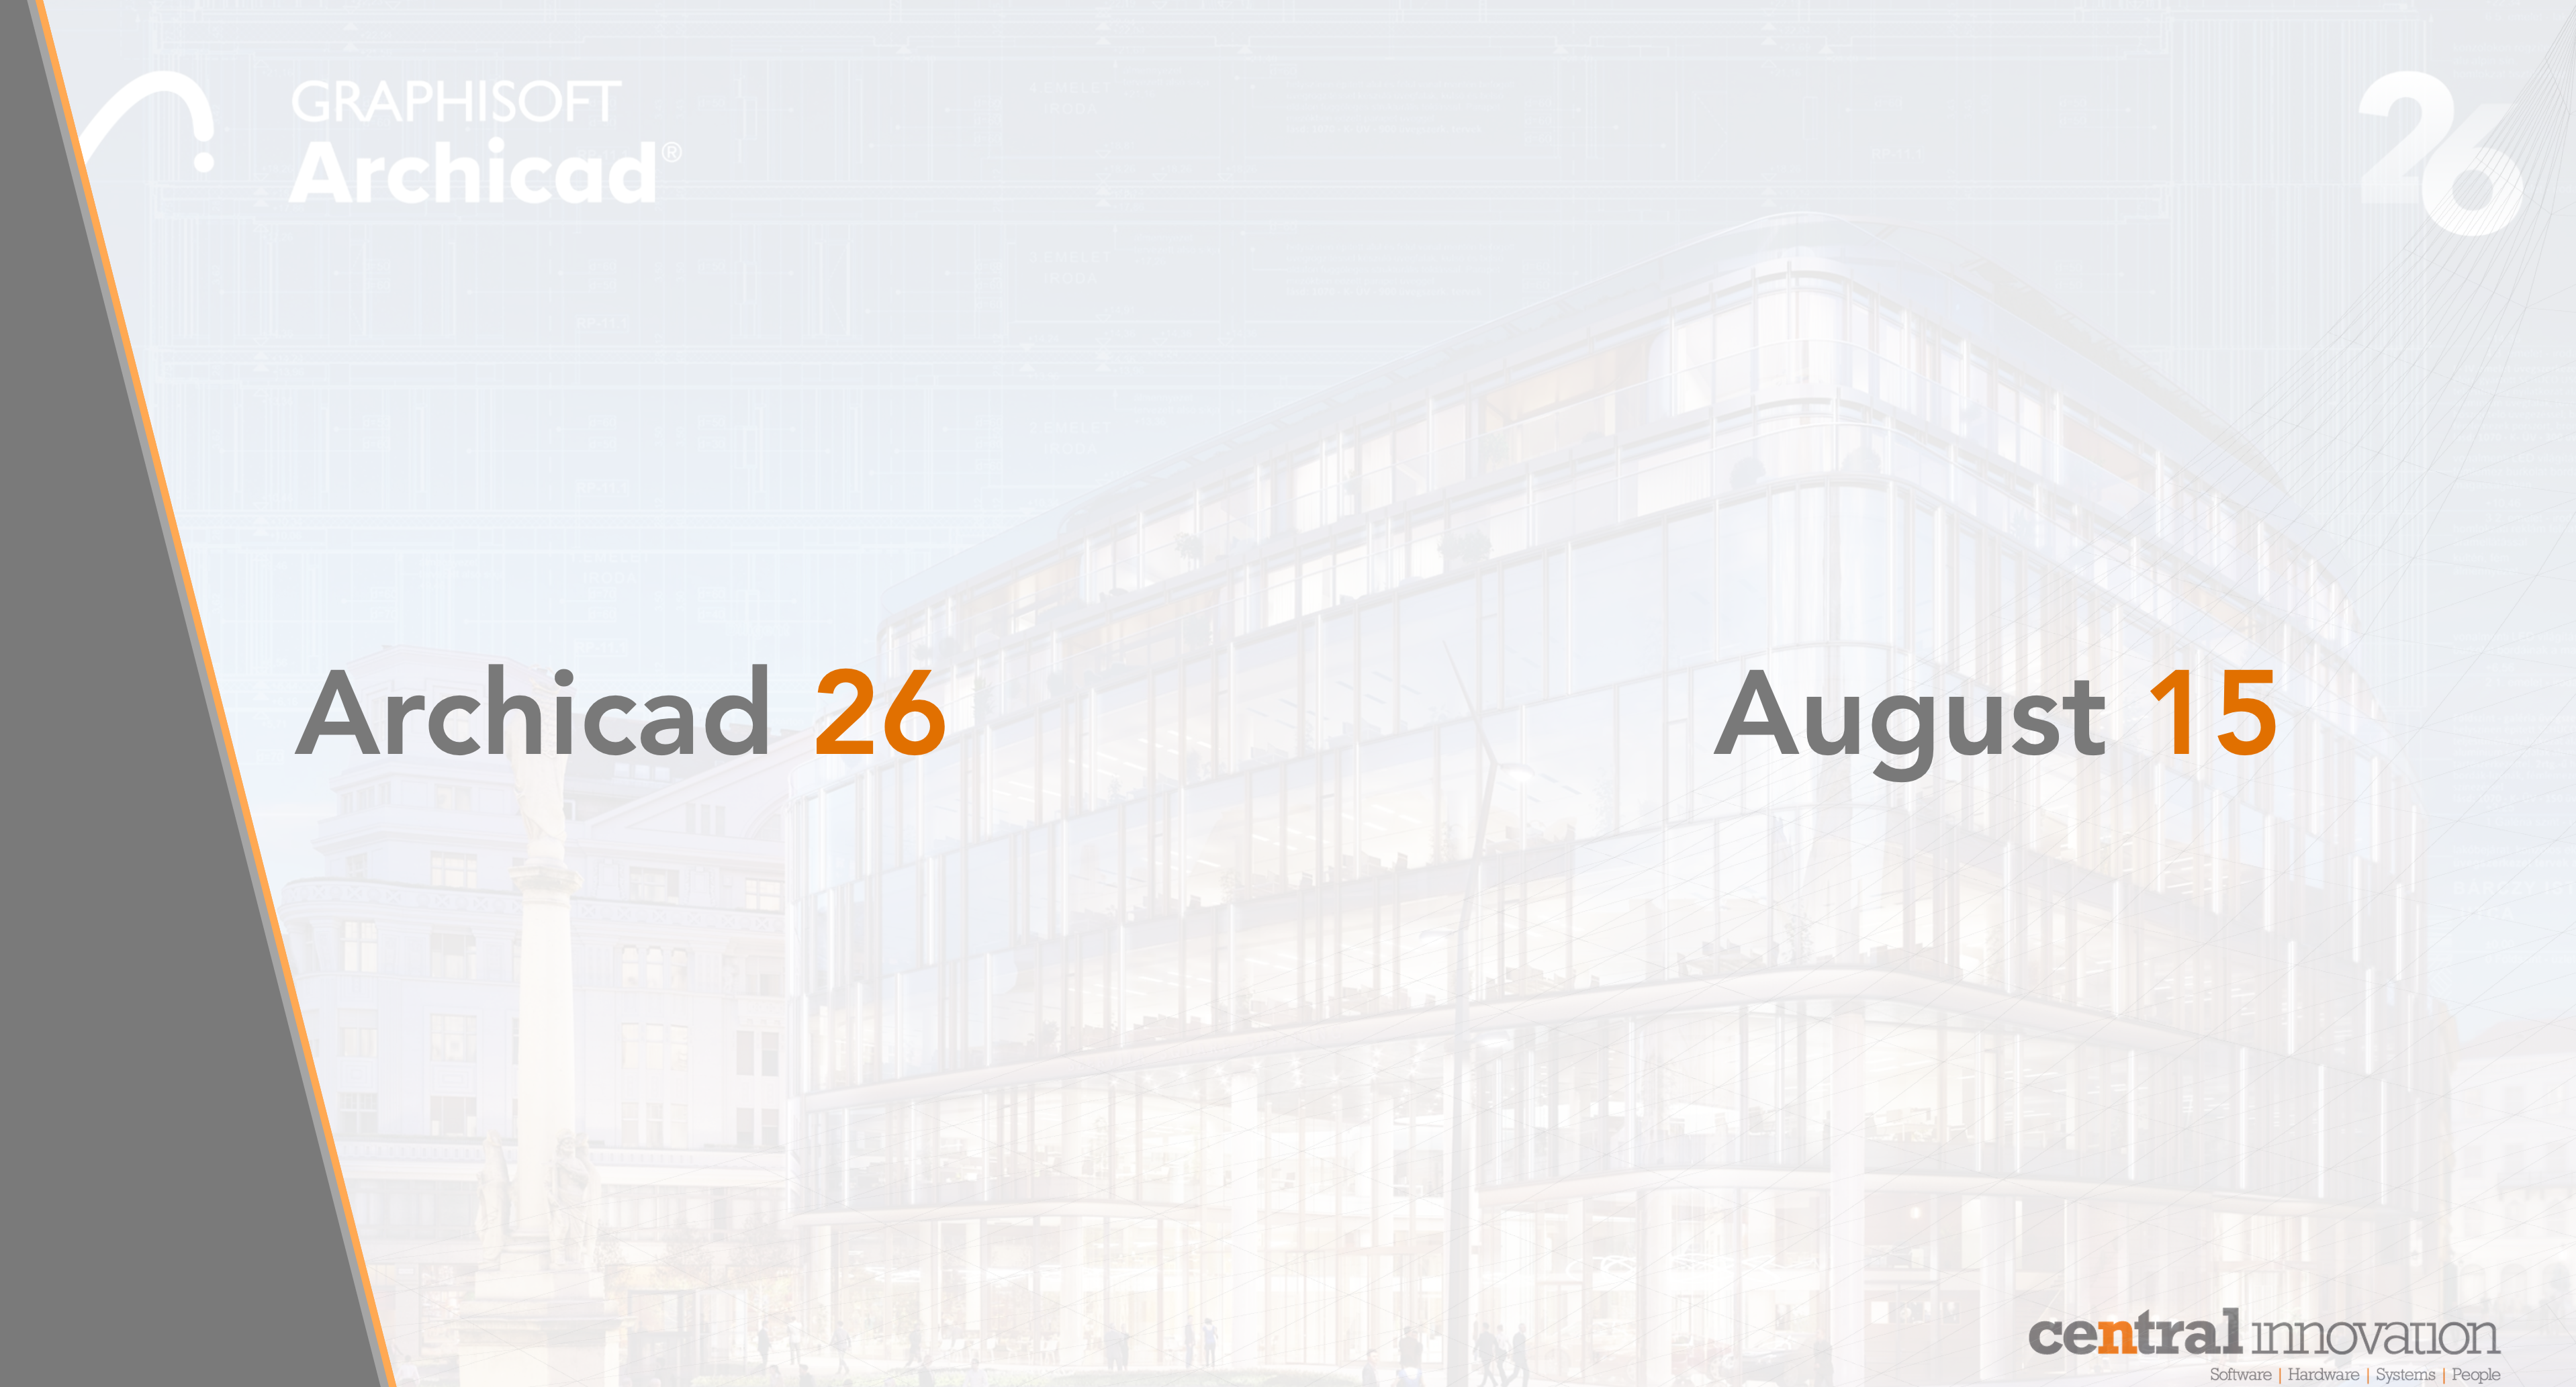 August 15 = Archicad 26